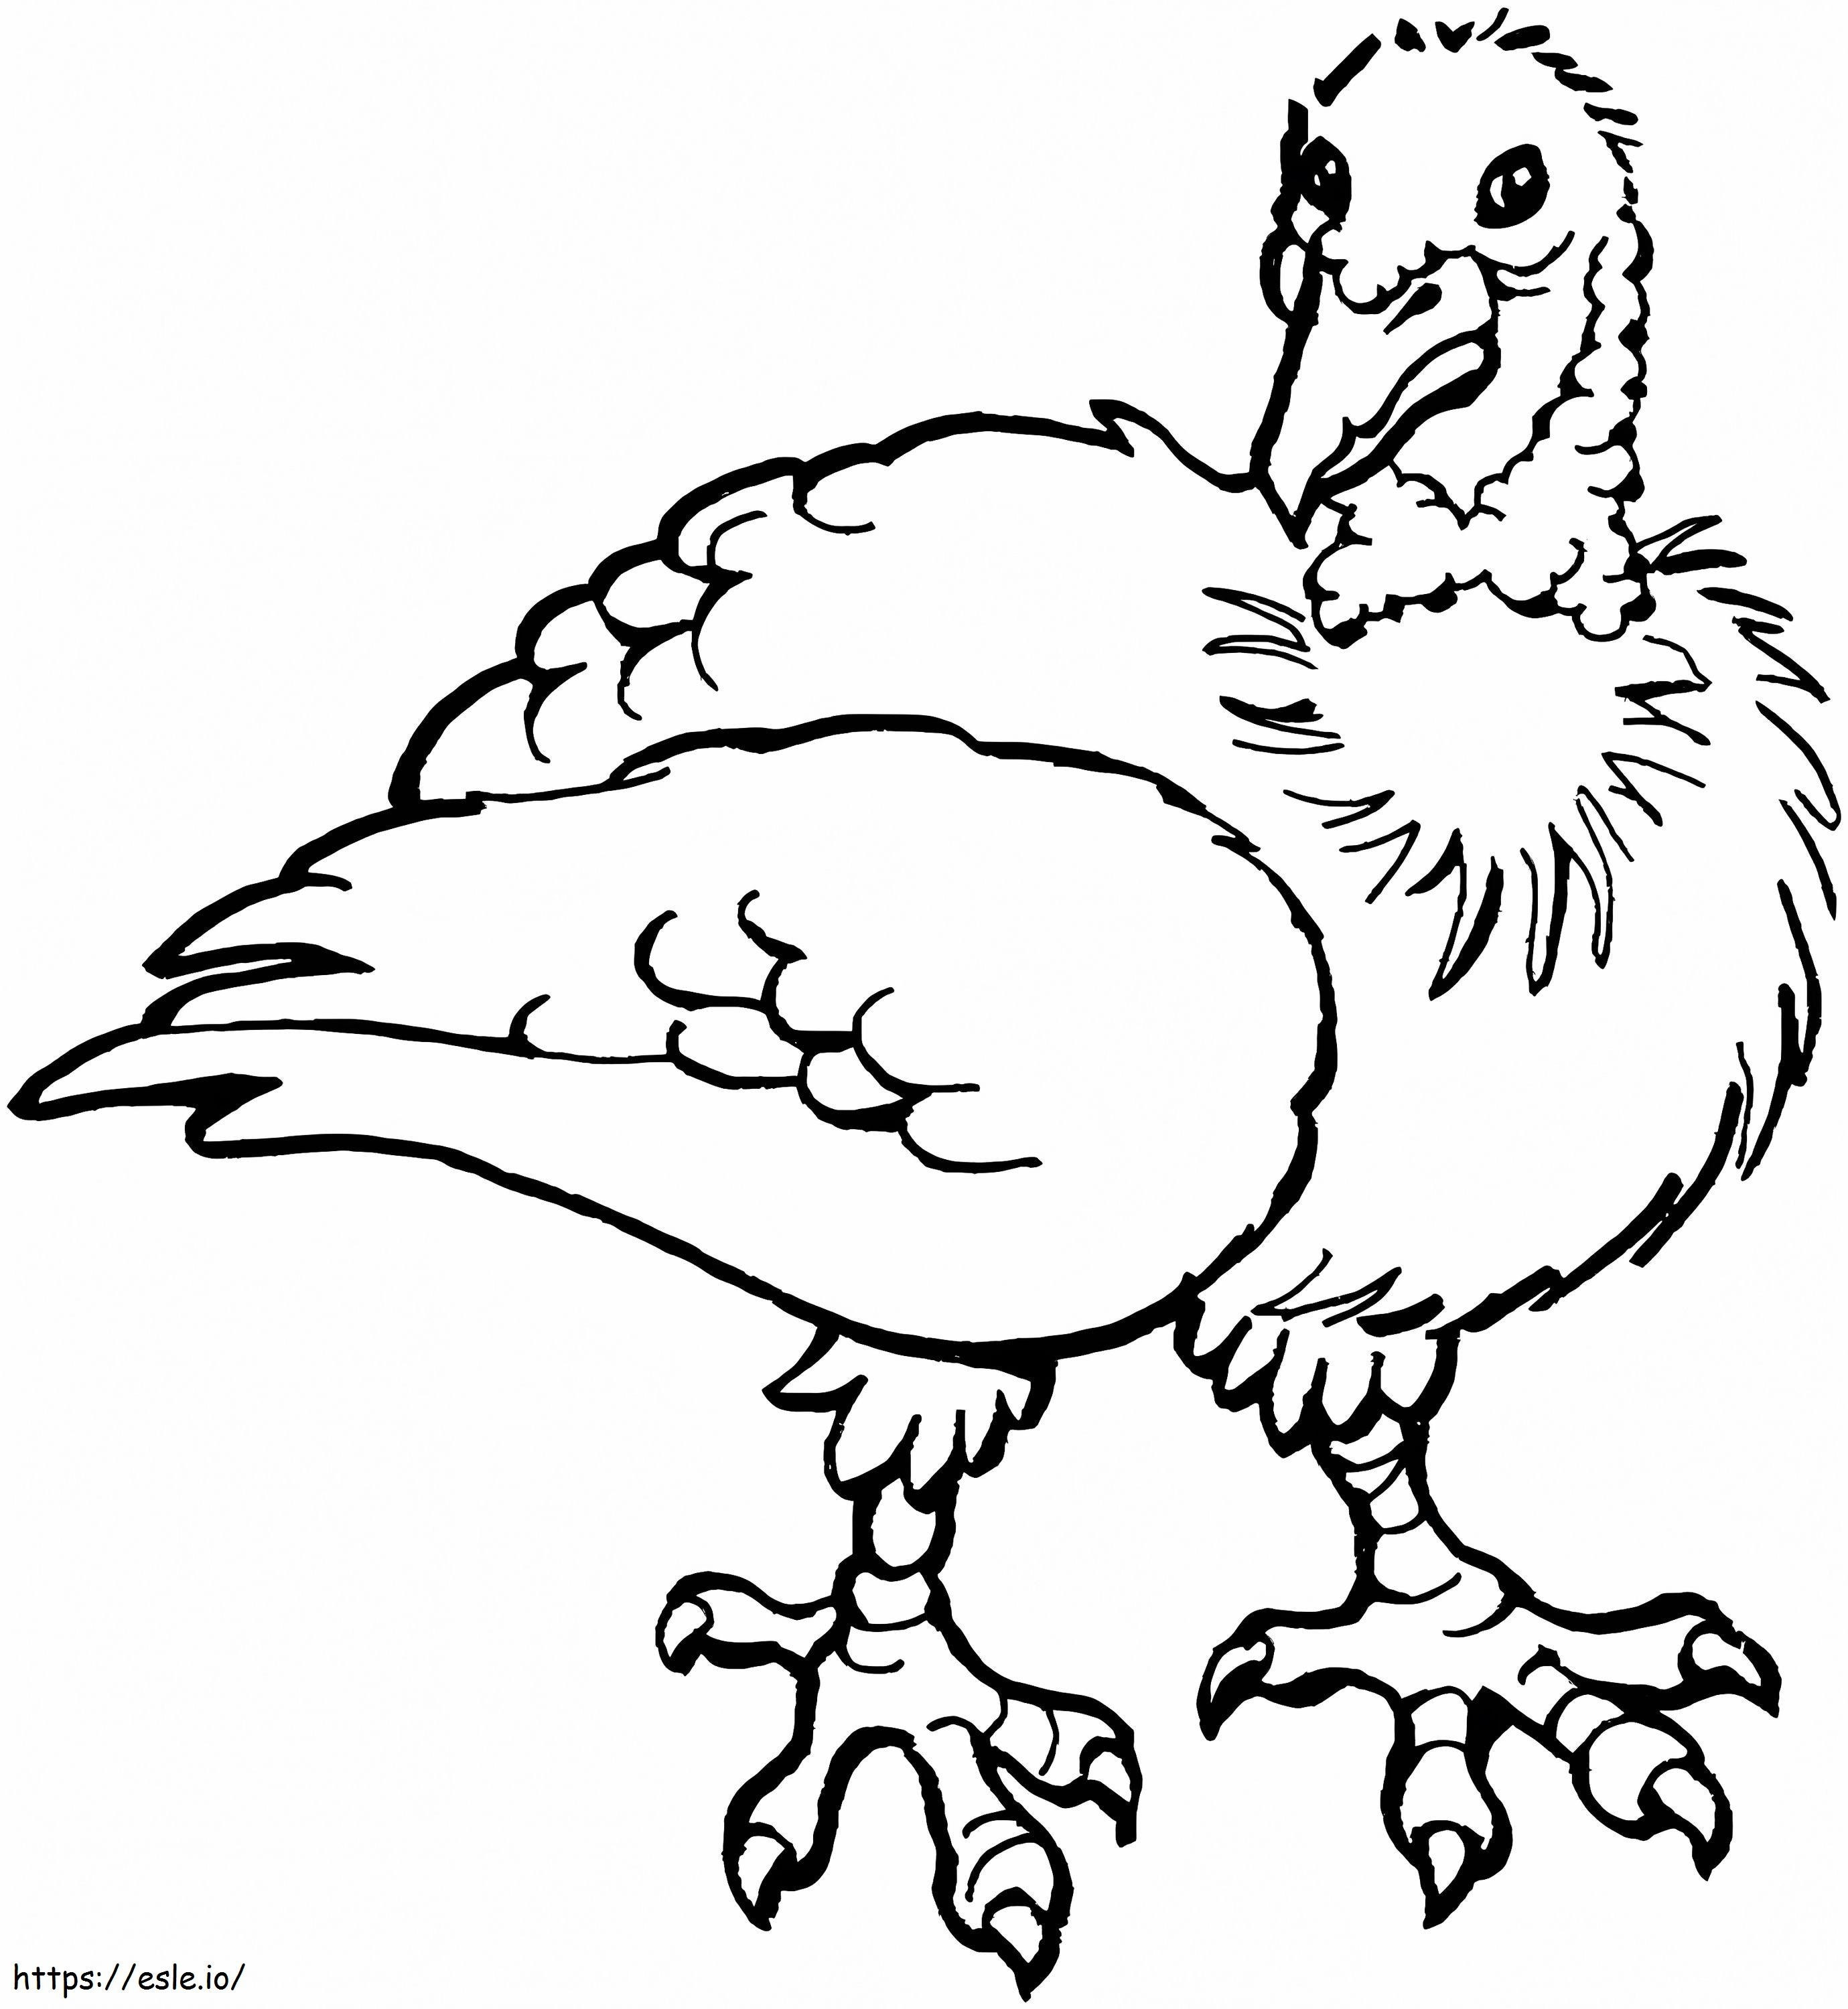 Ugly Chicken coloring page